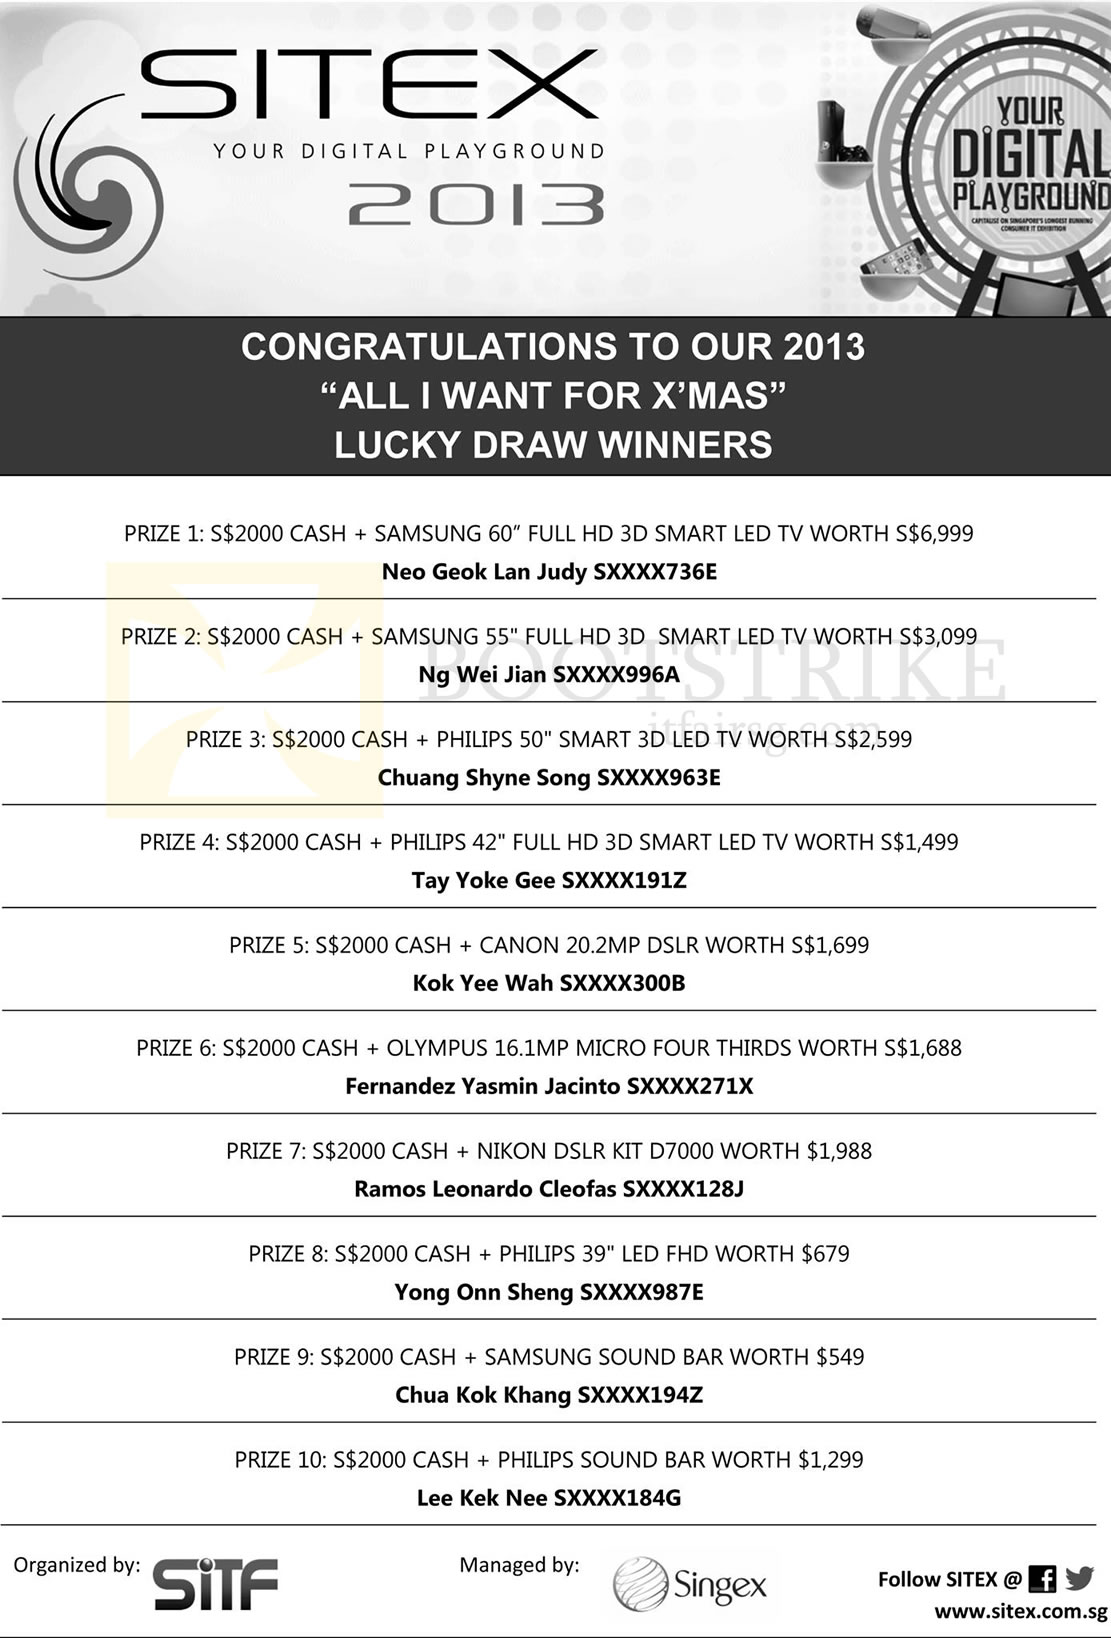 SITEX 2013 price list image brochure of Lucky Draw Results Winners